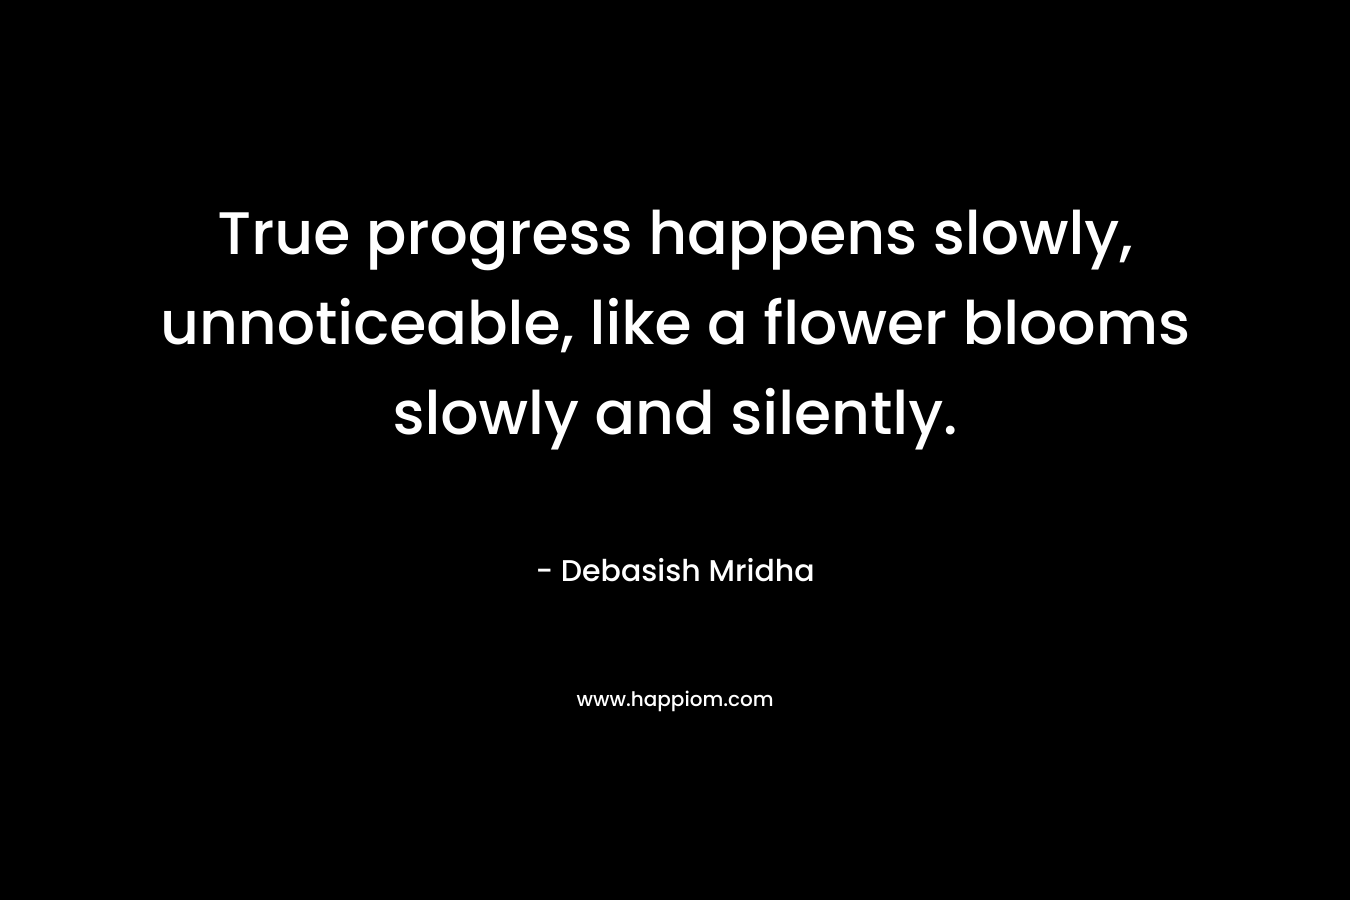 True progress happens slowly, unnoticeable, like a flower blooms slowly and silently. – Debasish Mridha